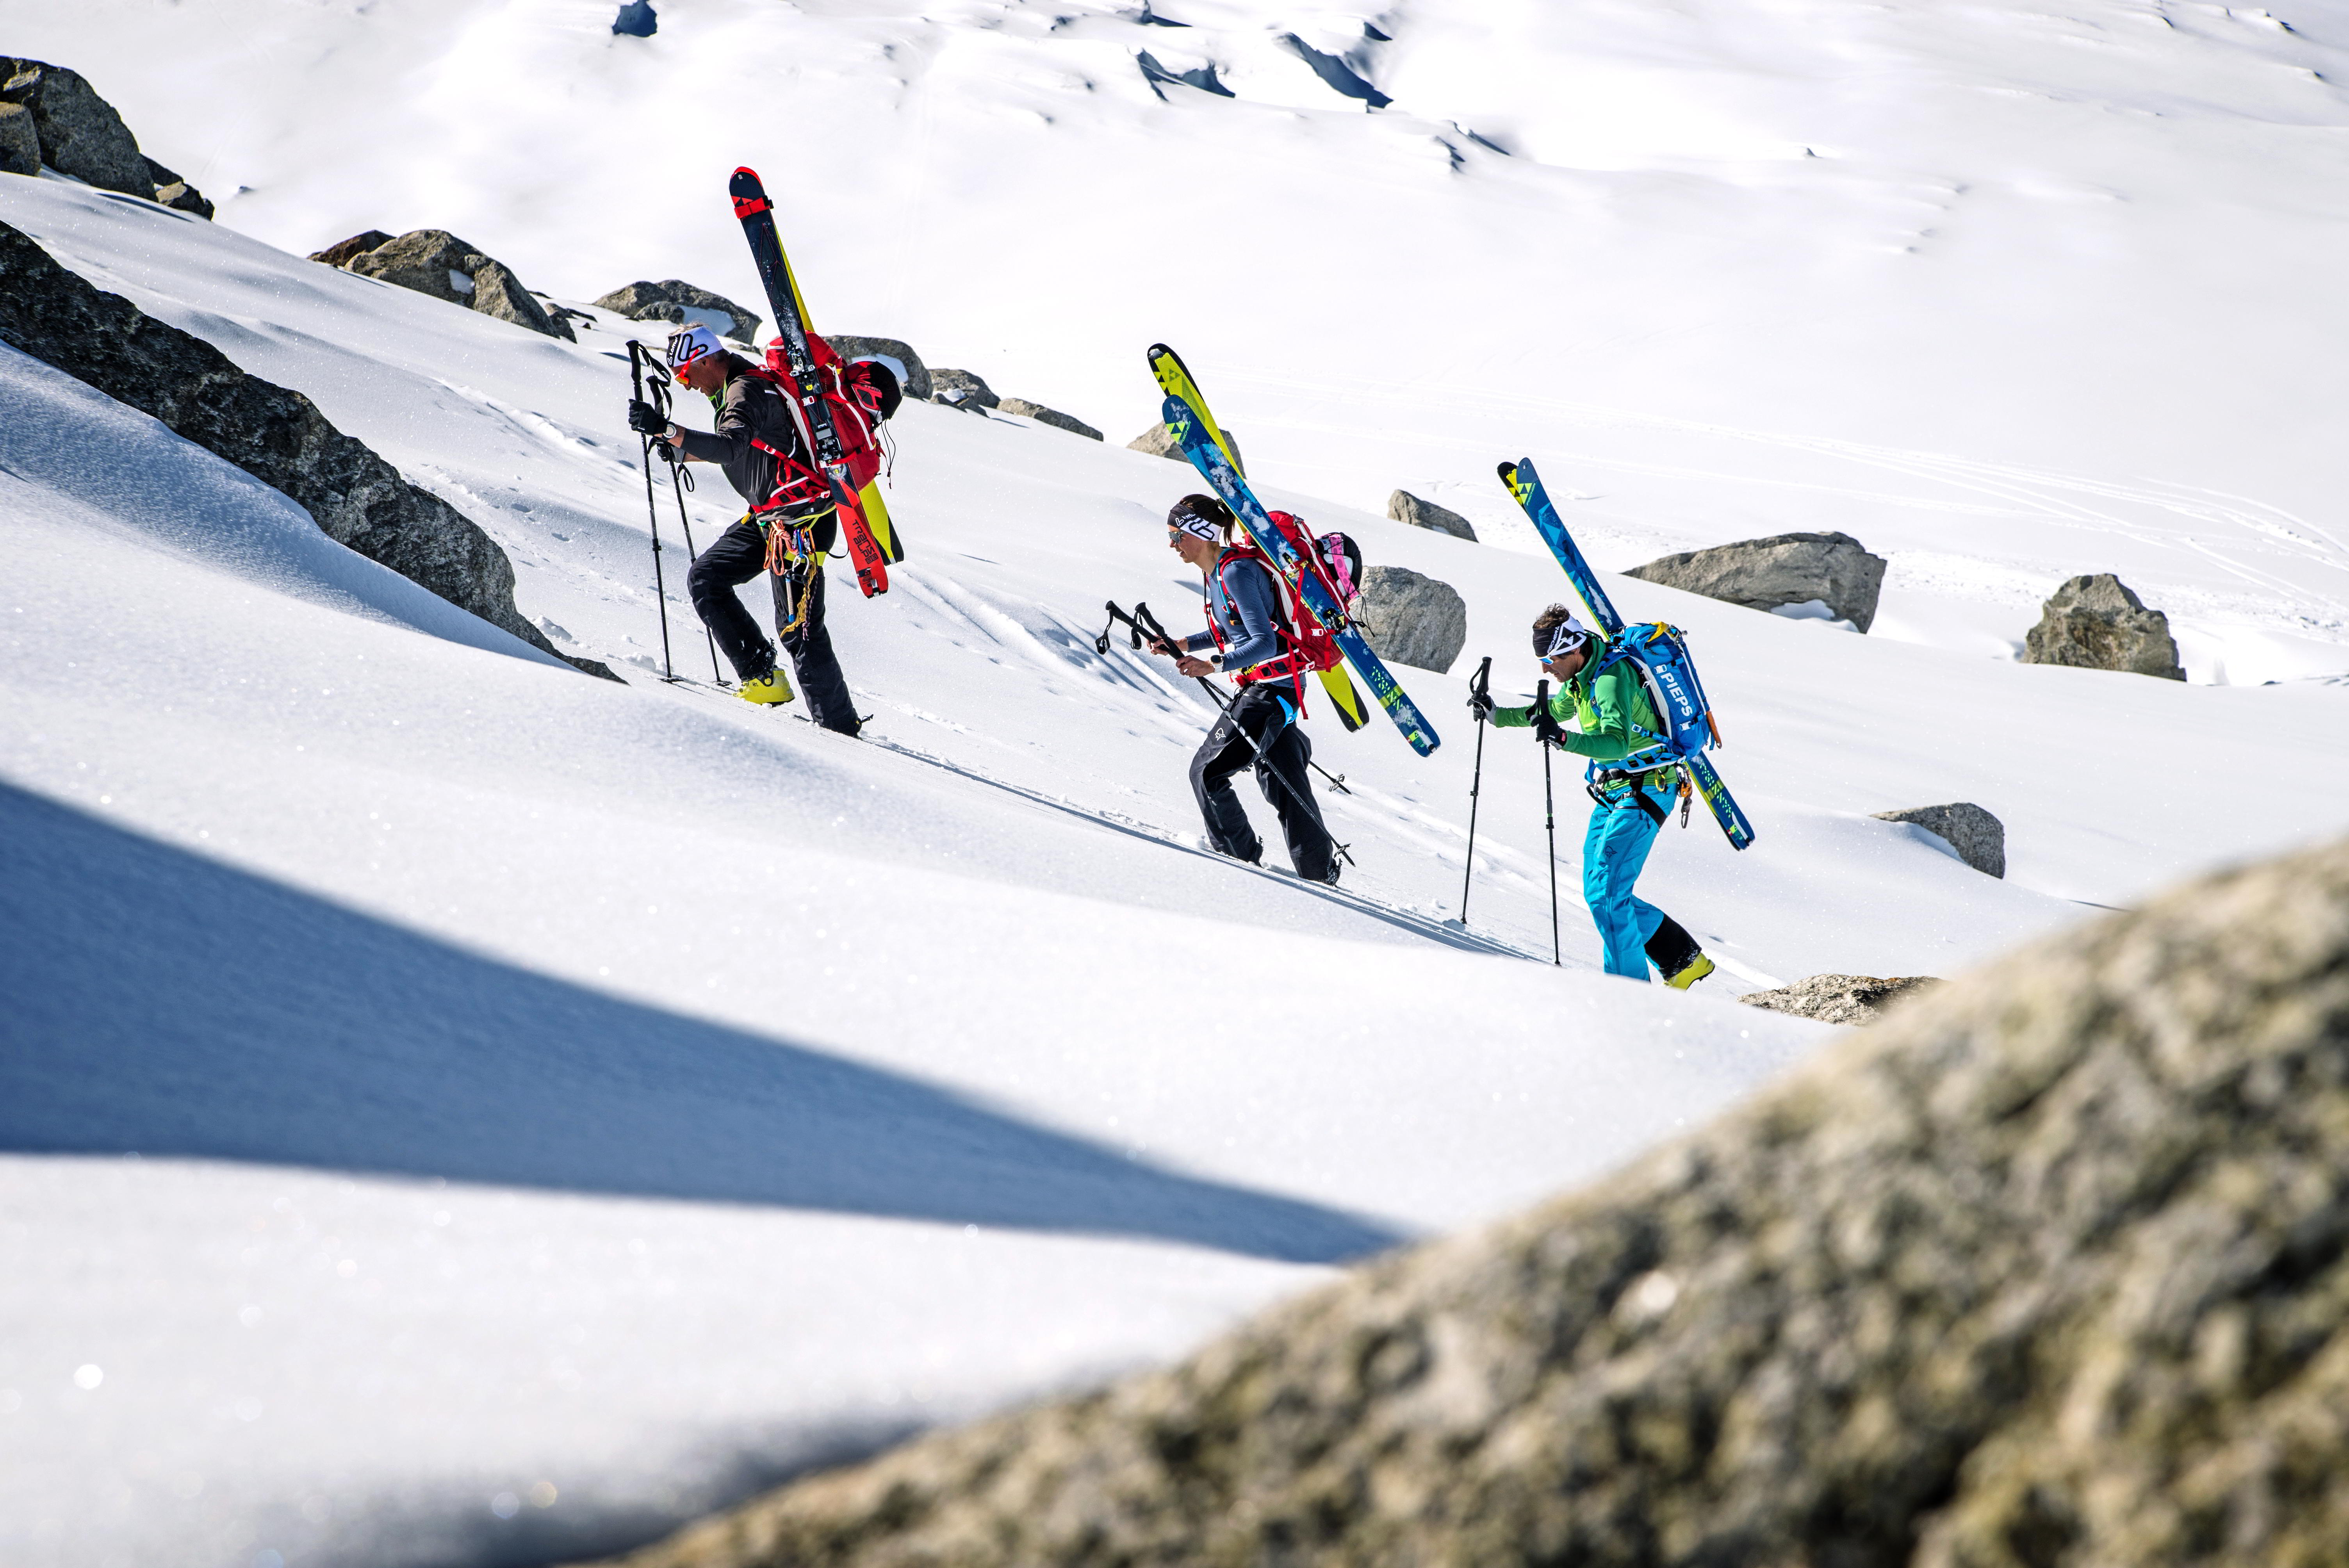 Ski touring trend: Skiers are driven by the need for fitness training and a  nature experience in winter sports